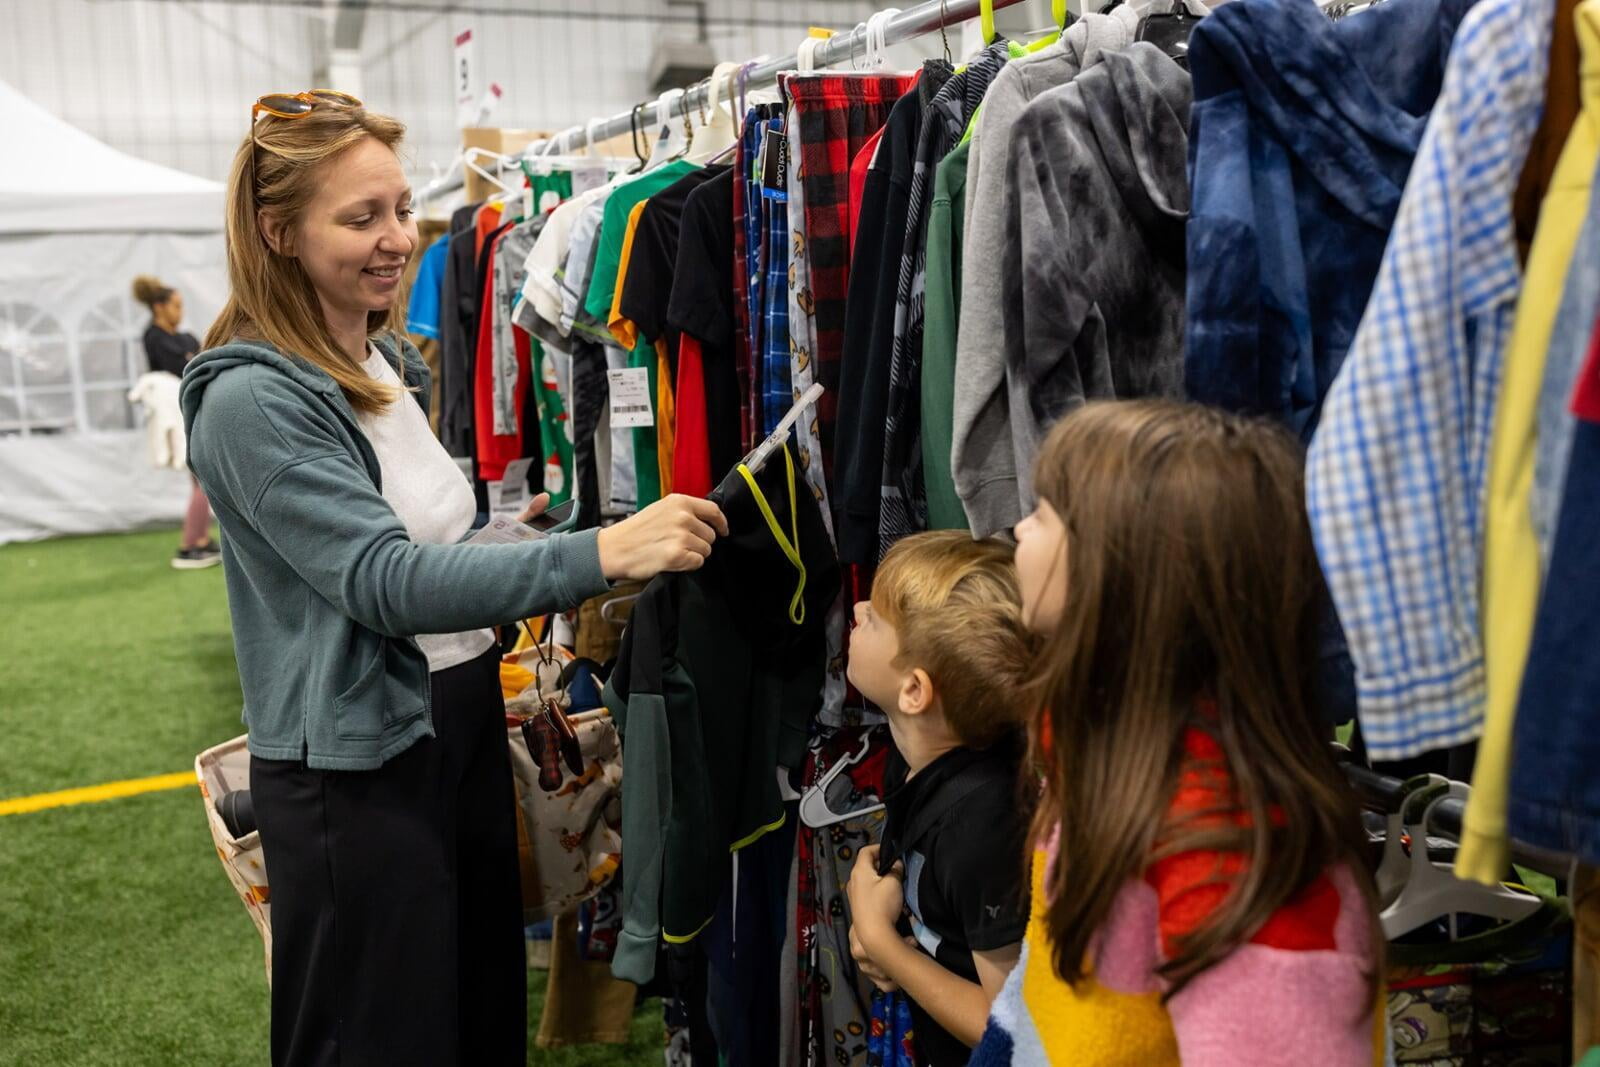 Woman shopping secondhand clothing with her young children looking on.